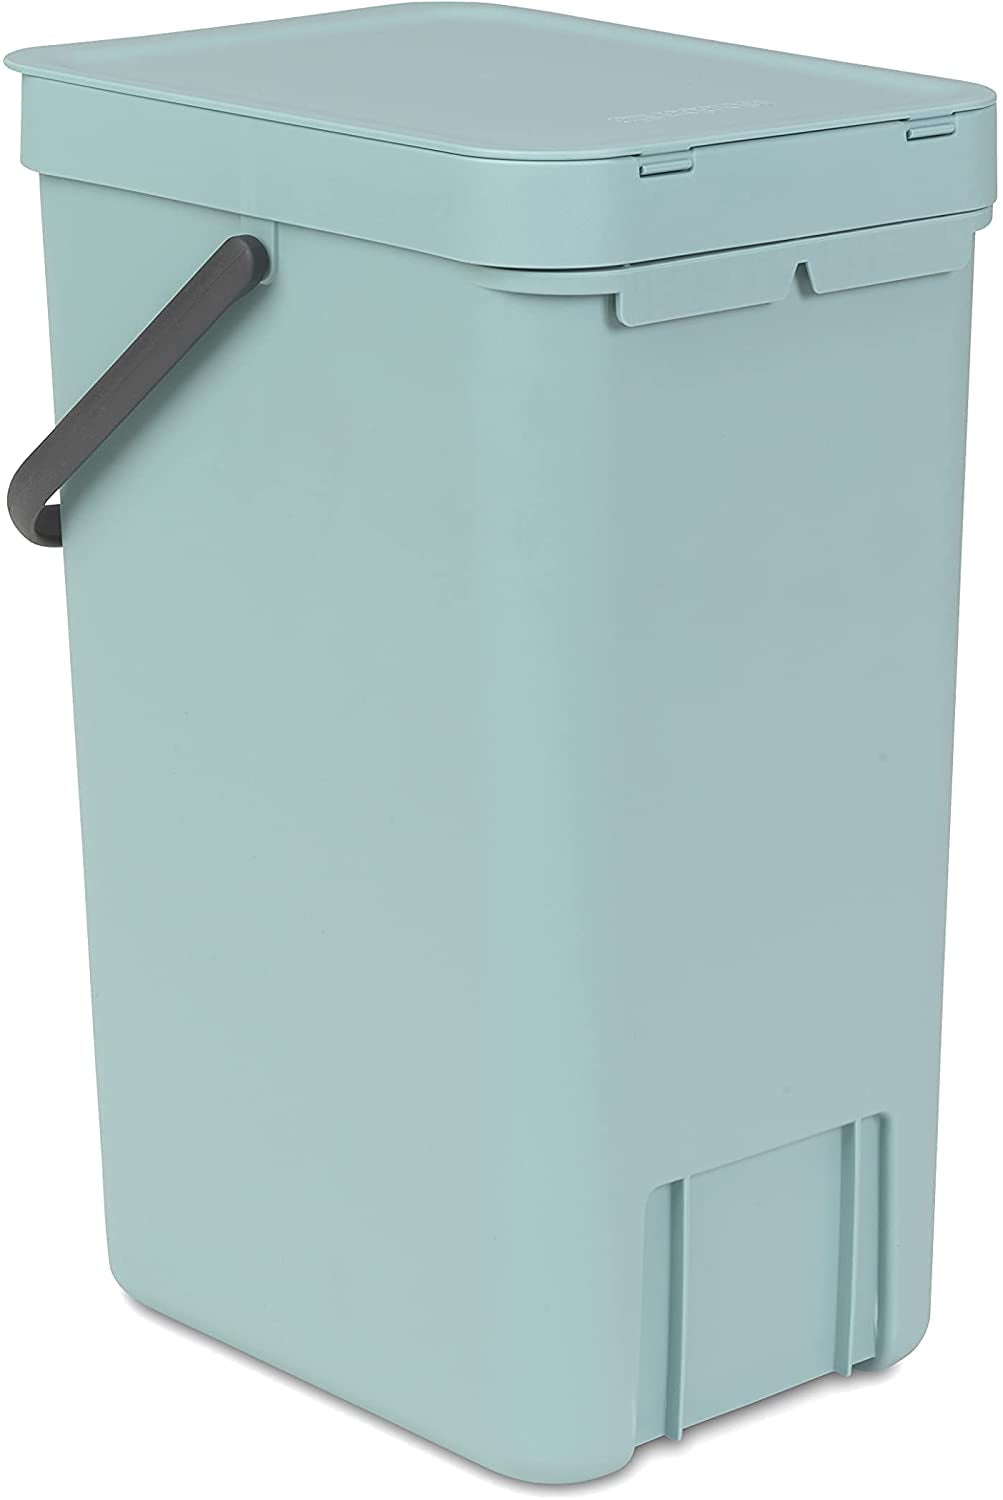 Sort & Go Kitchen Recycling Bin (16L / Mint) Stackable Waste Organiser with Handle & Removable Lid, Easy Clean, Fixtures Included for Wall/Cupboard Mounting